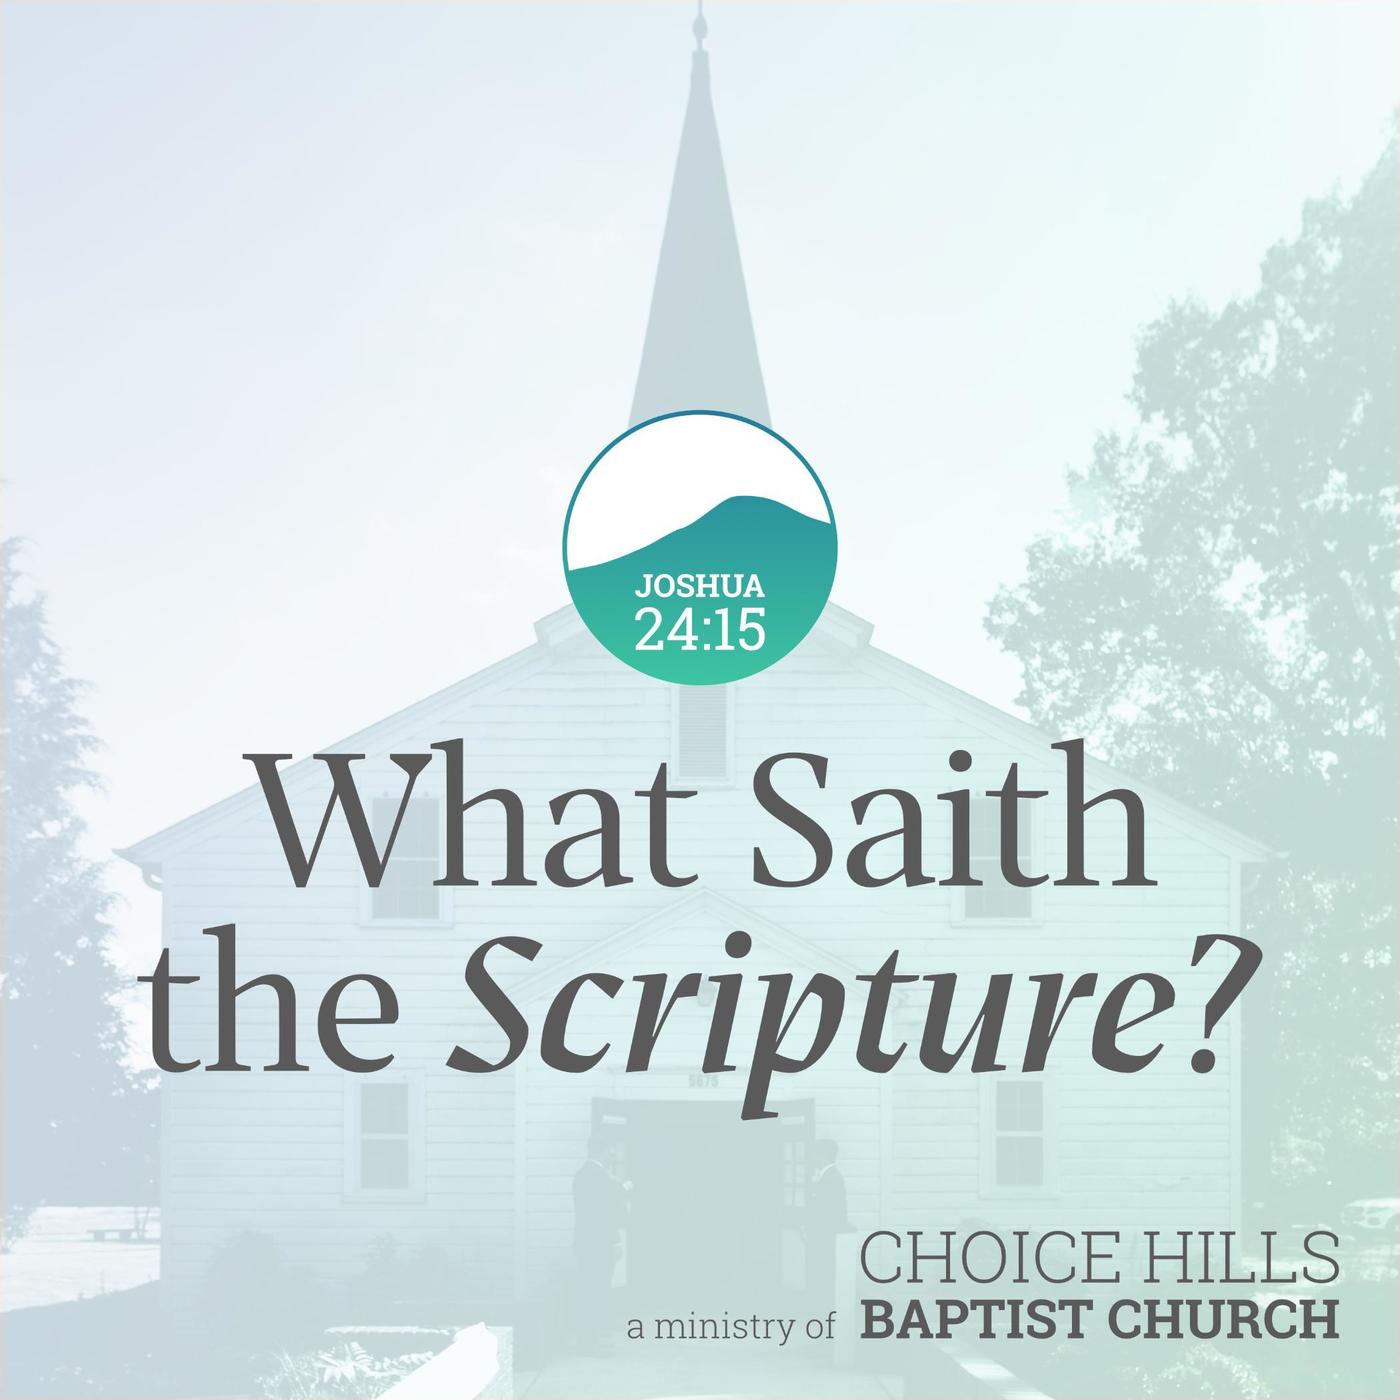 Adult Sunday School: Study of the 119th Psalm (Part 8)